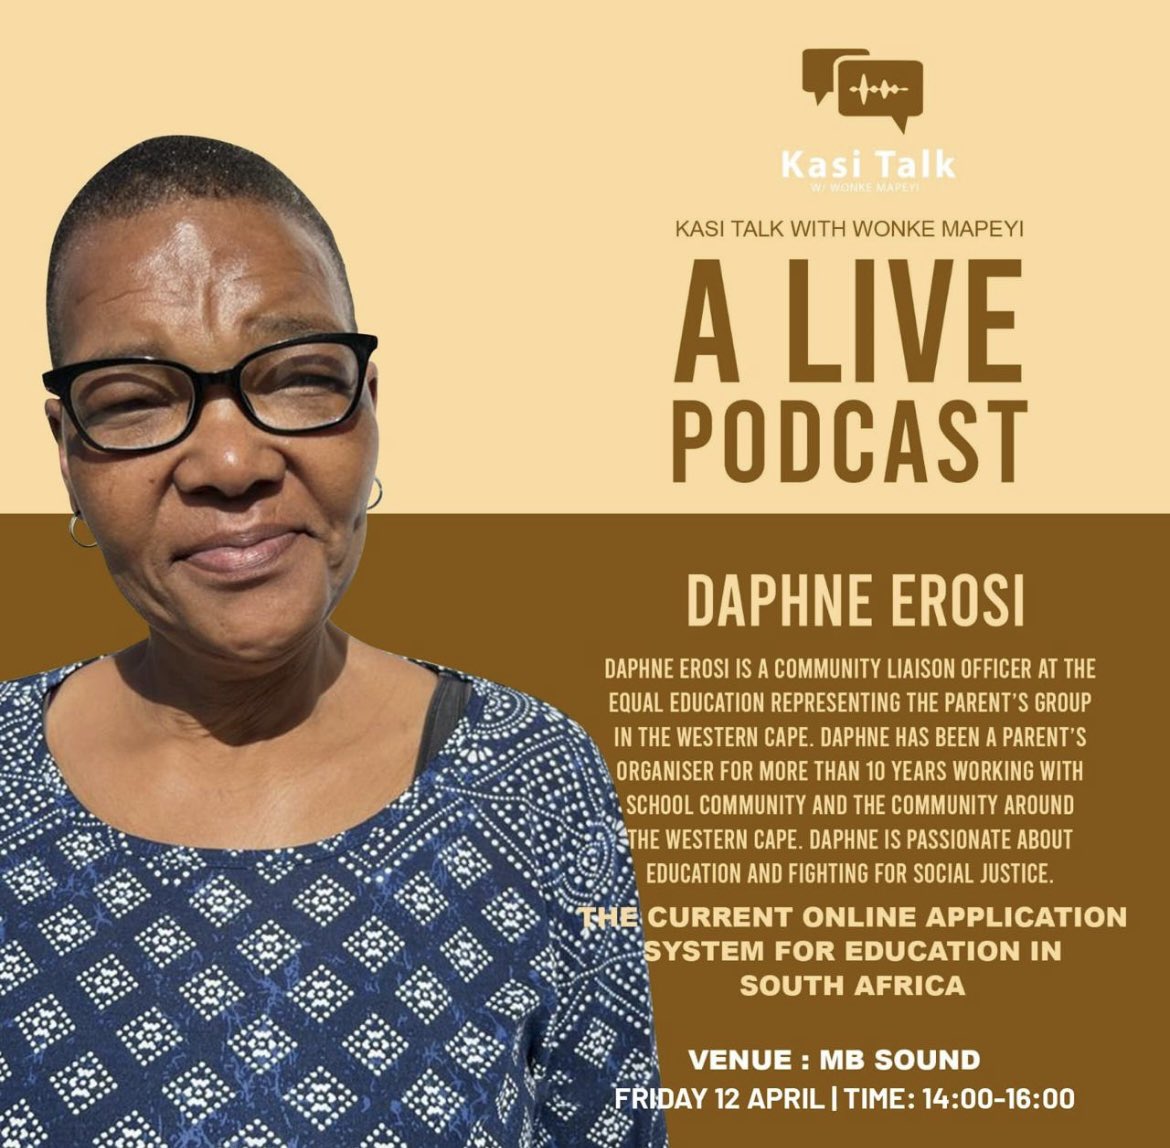 [Podcast] Yolisa Piliso and Mam D of Equal Education in conversation with Wonke Mapeyi on Kasi Talk, talking all things relating to admission of learners in school and challenges faced by parents as a result of the online application system in the Western Cape. #Sofundasonke